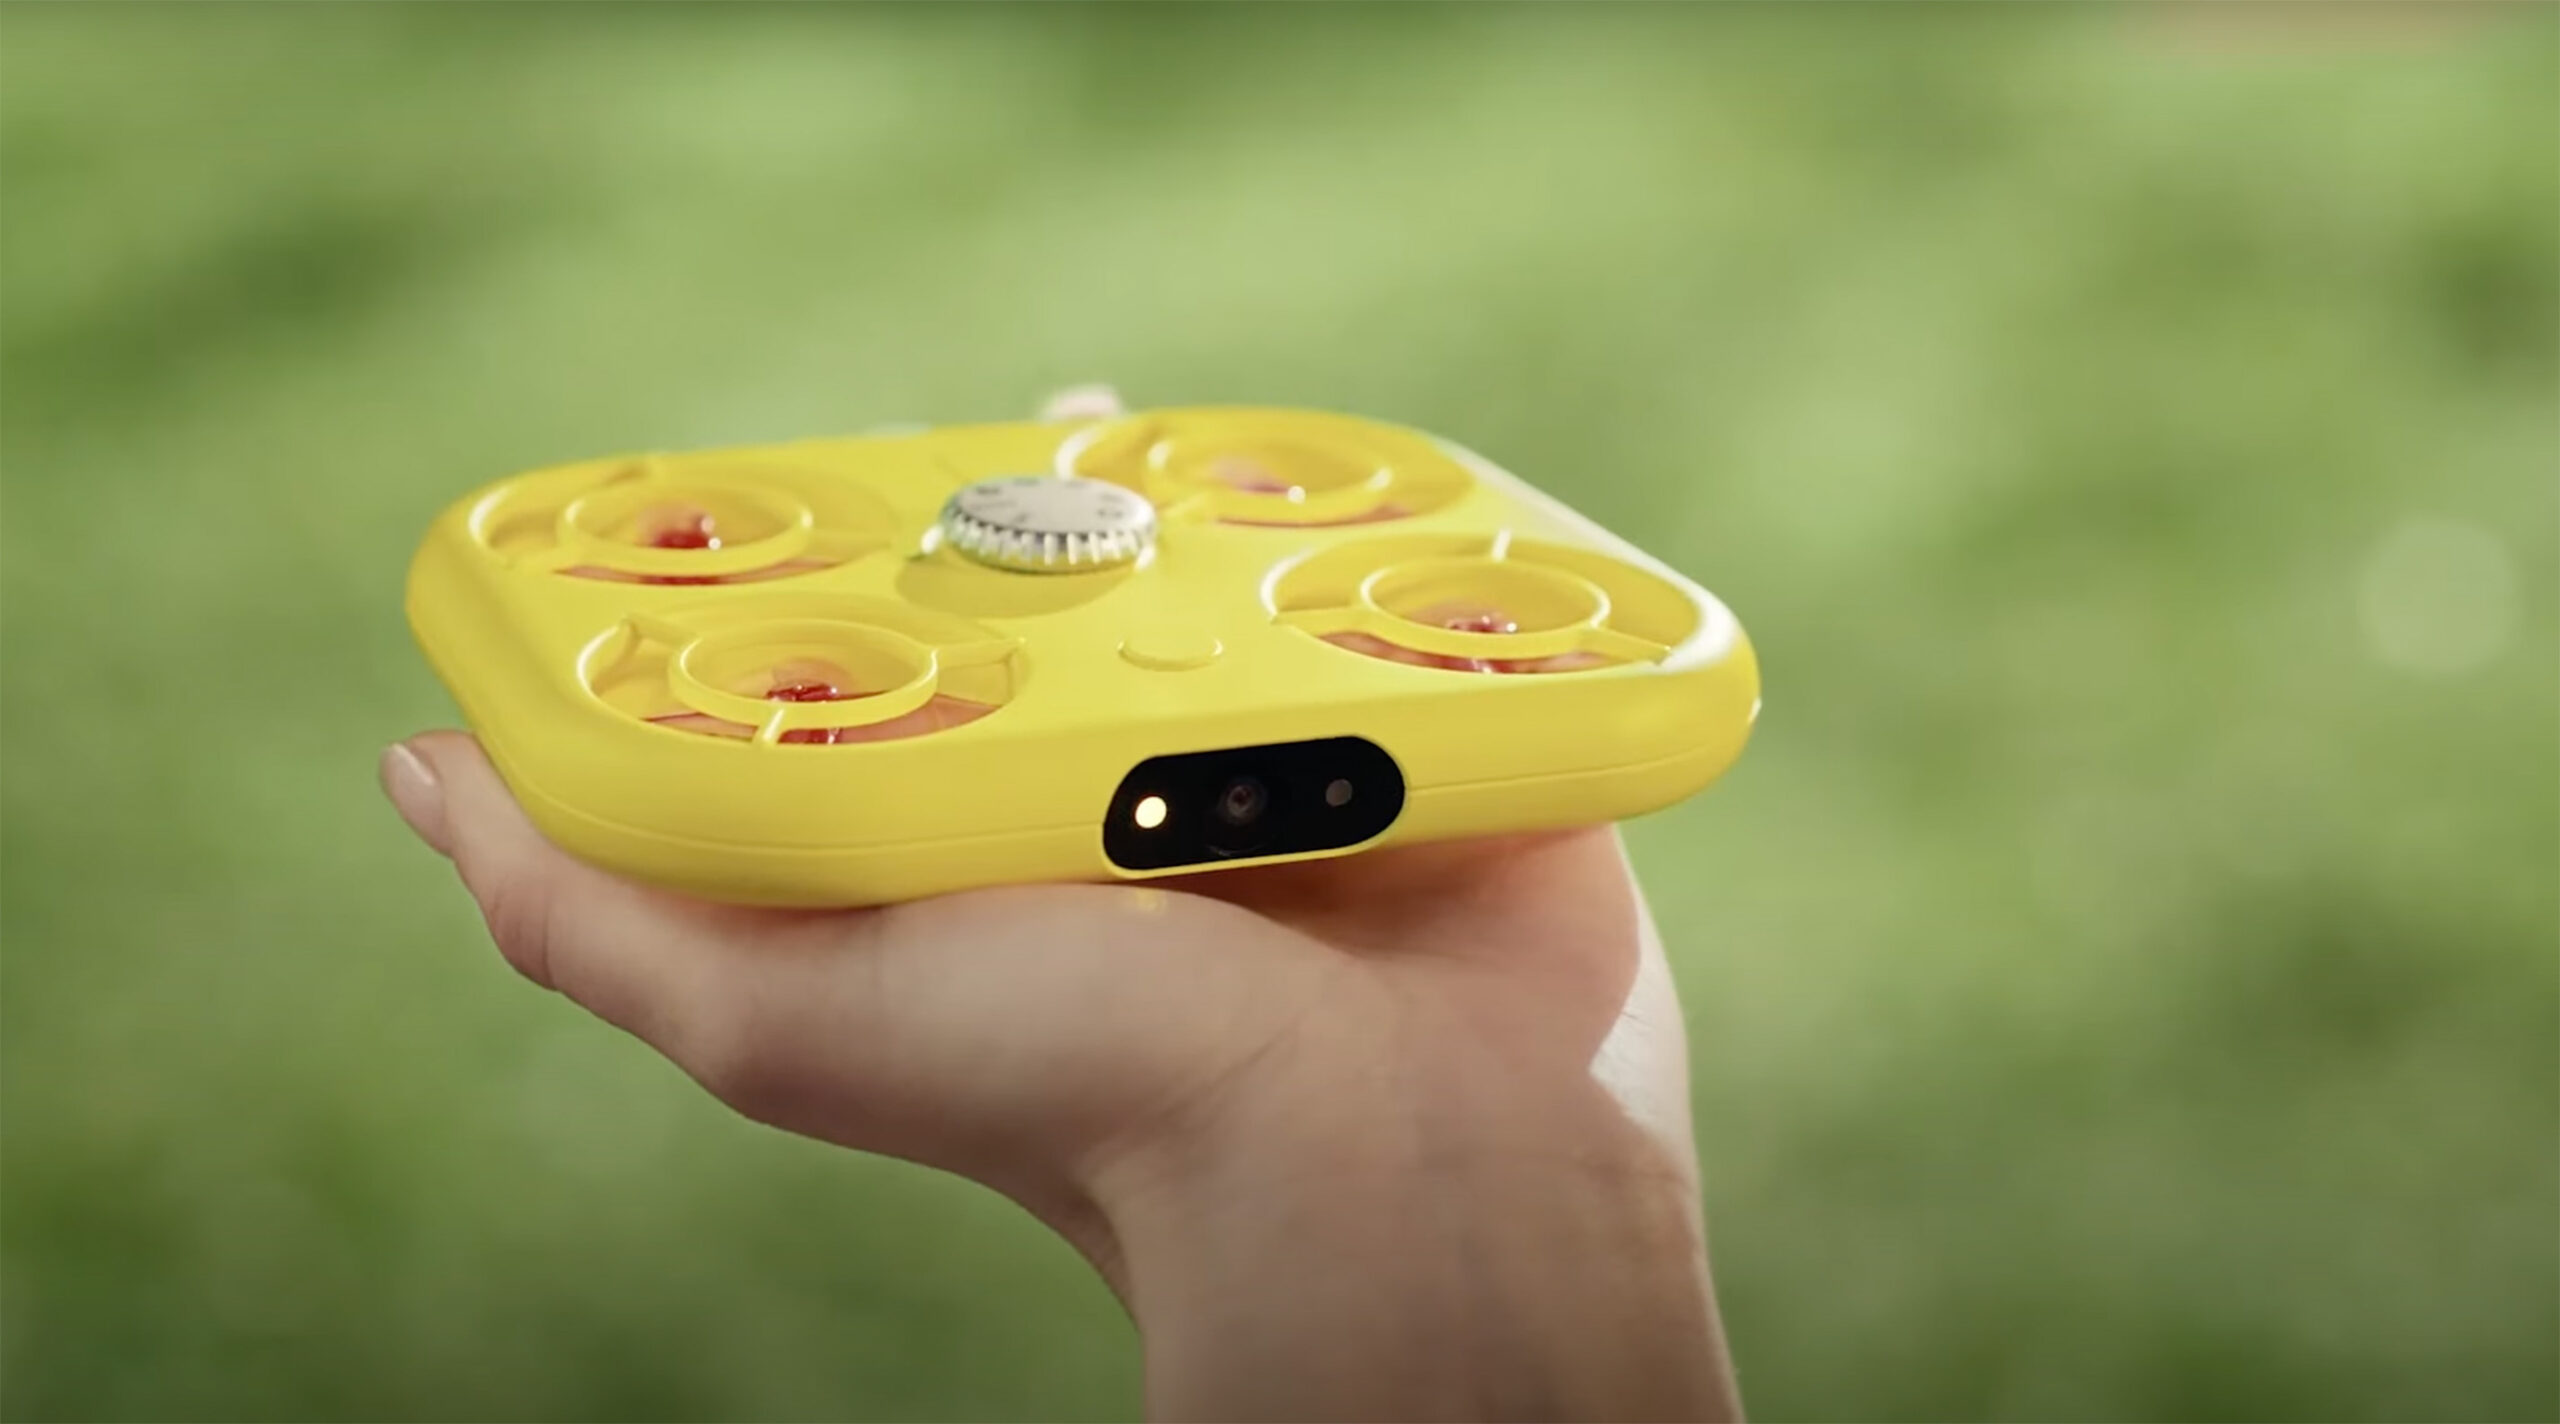 Pixy is a tiny, $230 drone built Snapchat Popular Photography